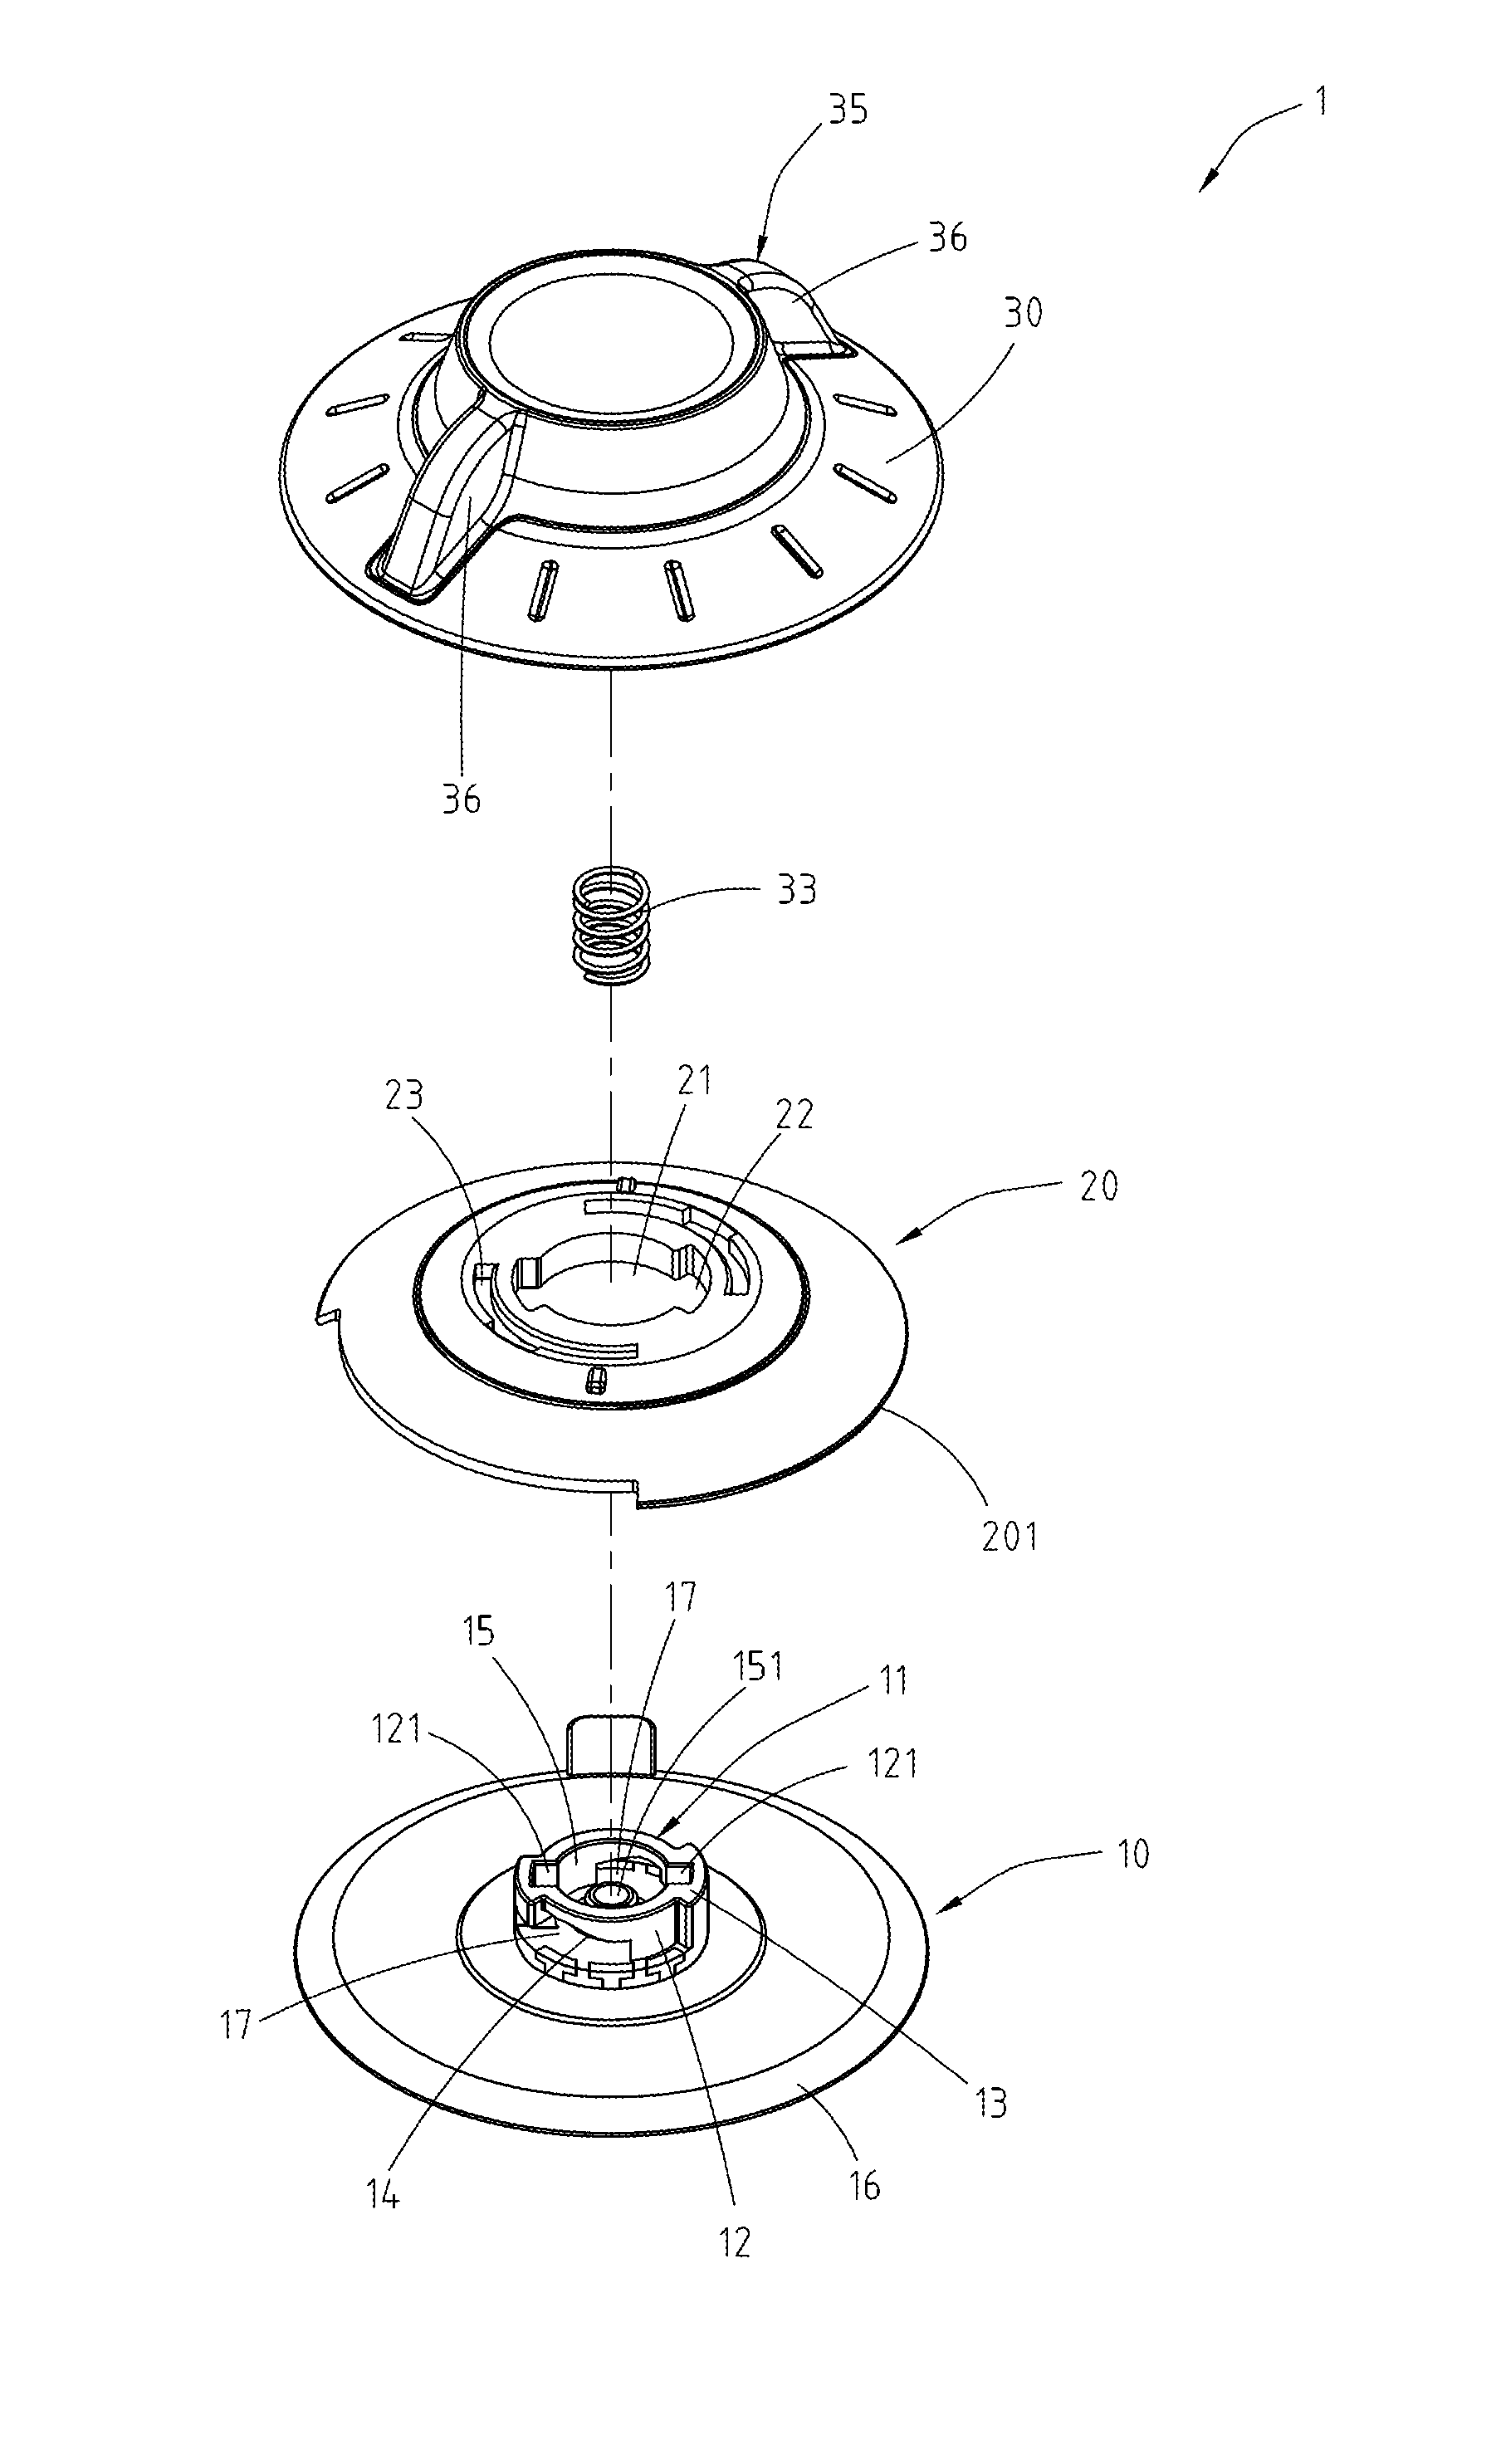 Rotary suction device